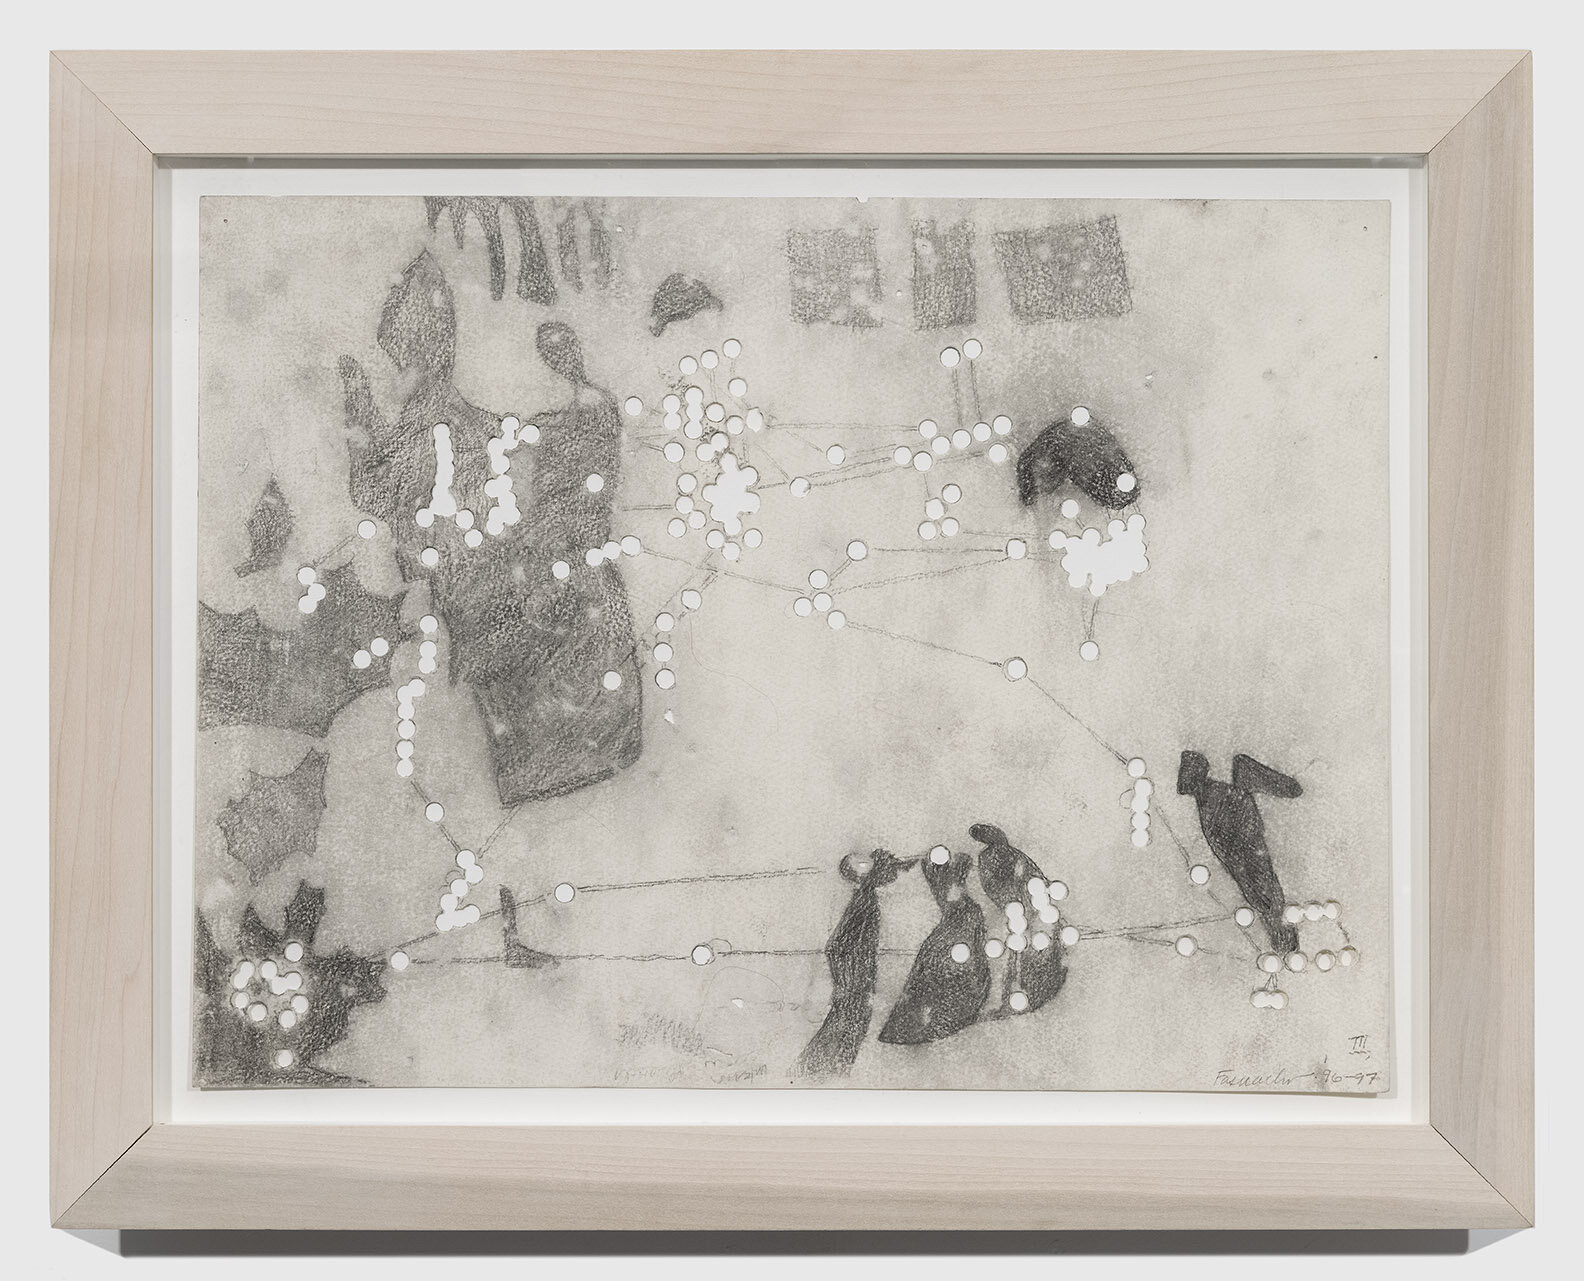 REM 2, 1996-97, Graphite on paper with holes, 15 x 20 inches